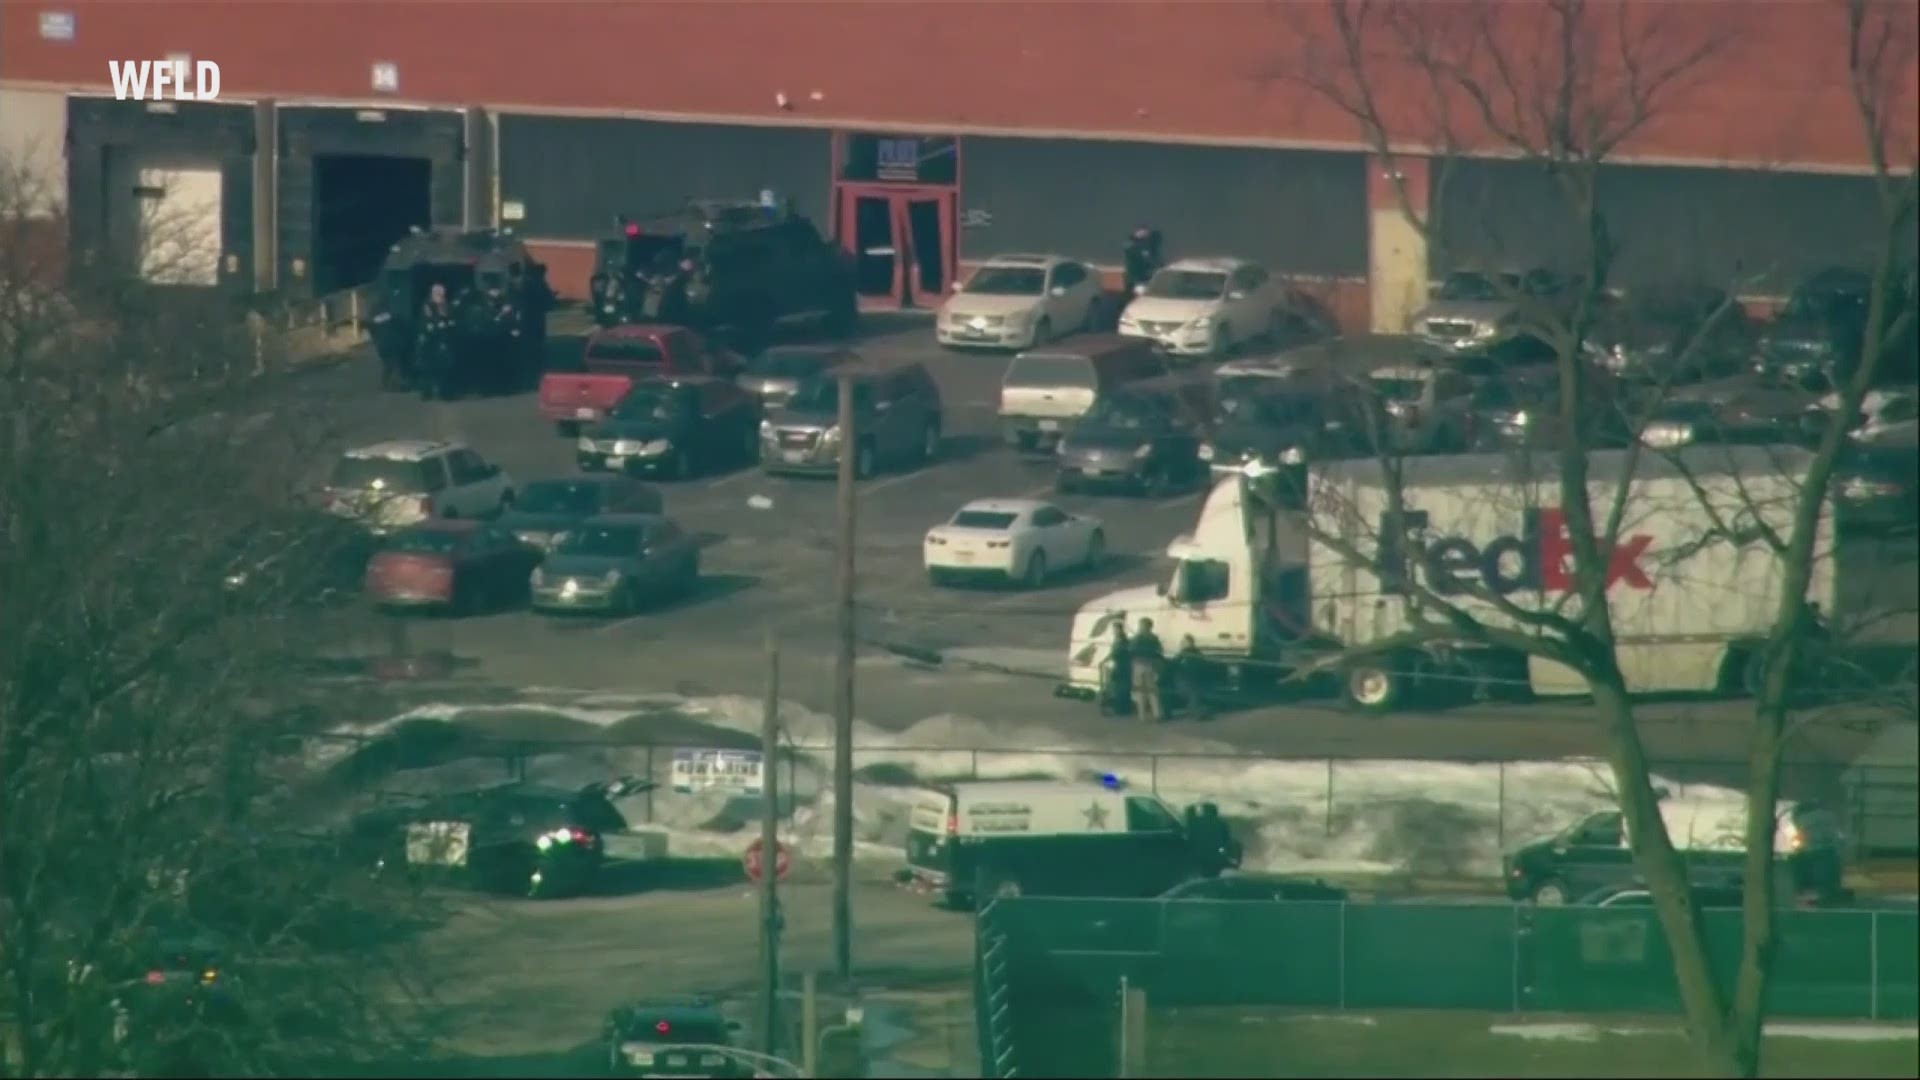 The City of Aurora said the suspected shooter in an incident at a suburban Chicago manufacturing facility has been apprehended. (WFLD via AP)